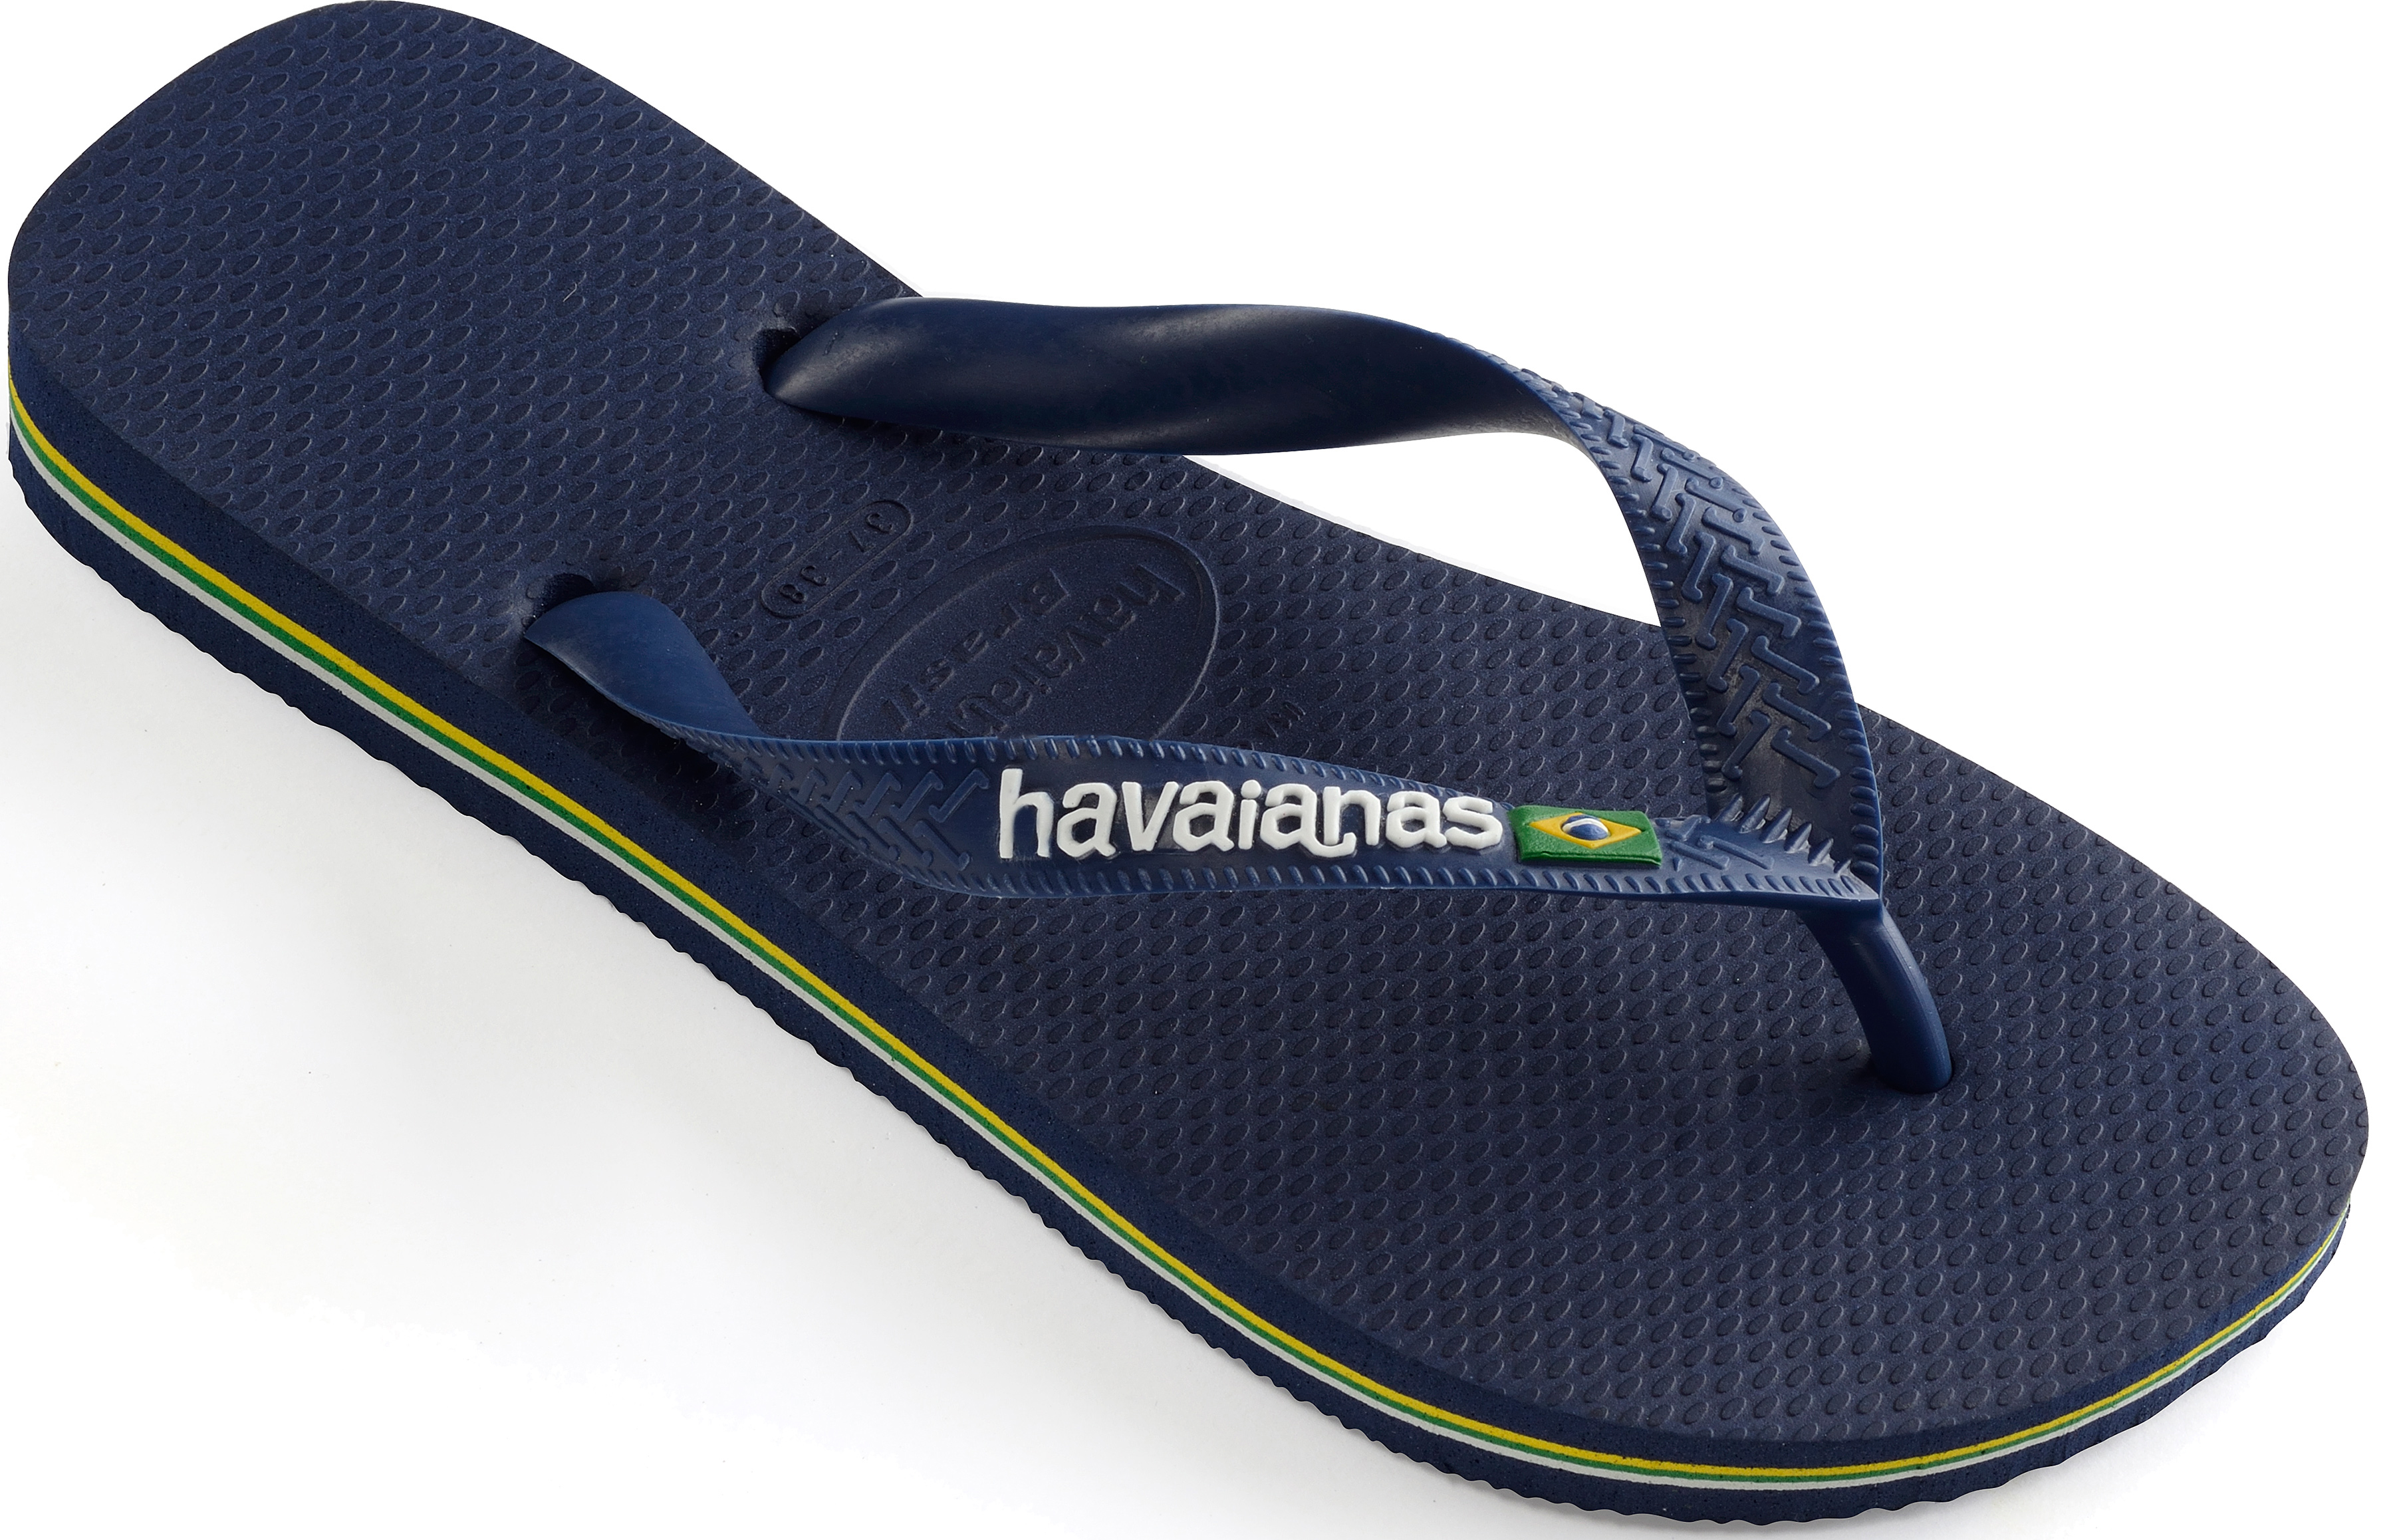 Kids Havaianas size Childs 13 Flip Flops  UK Stock, Shipped from Cornwall  - FlipFlopShop